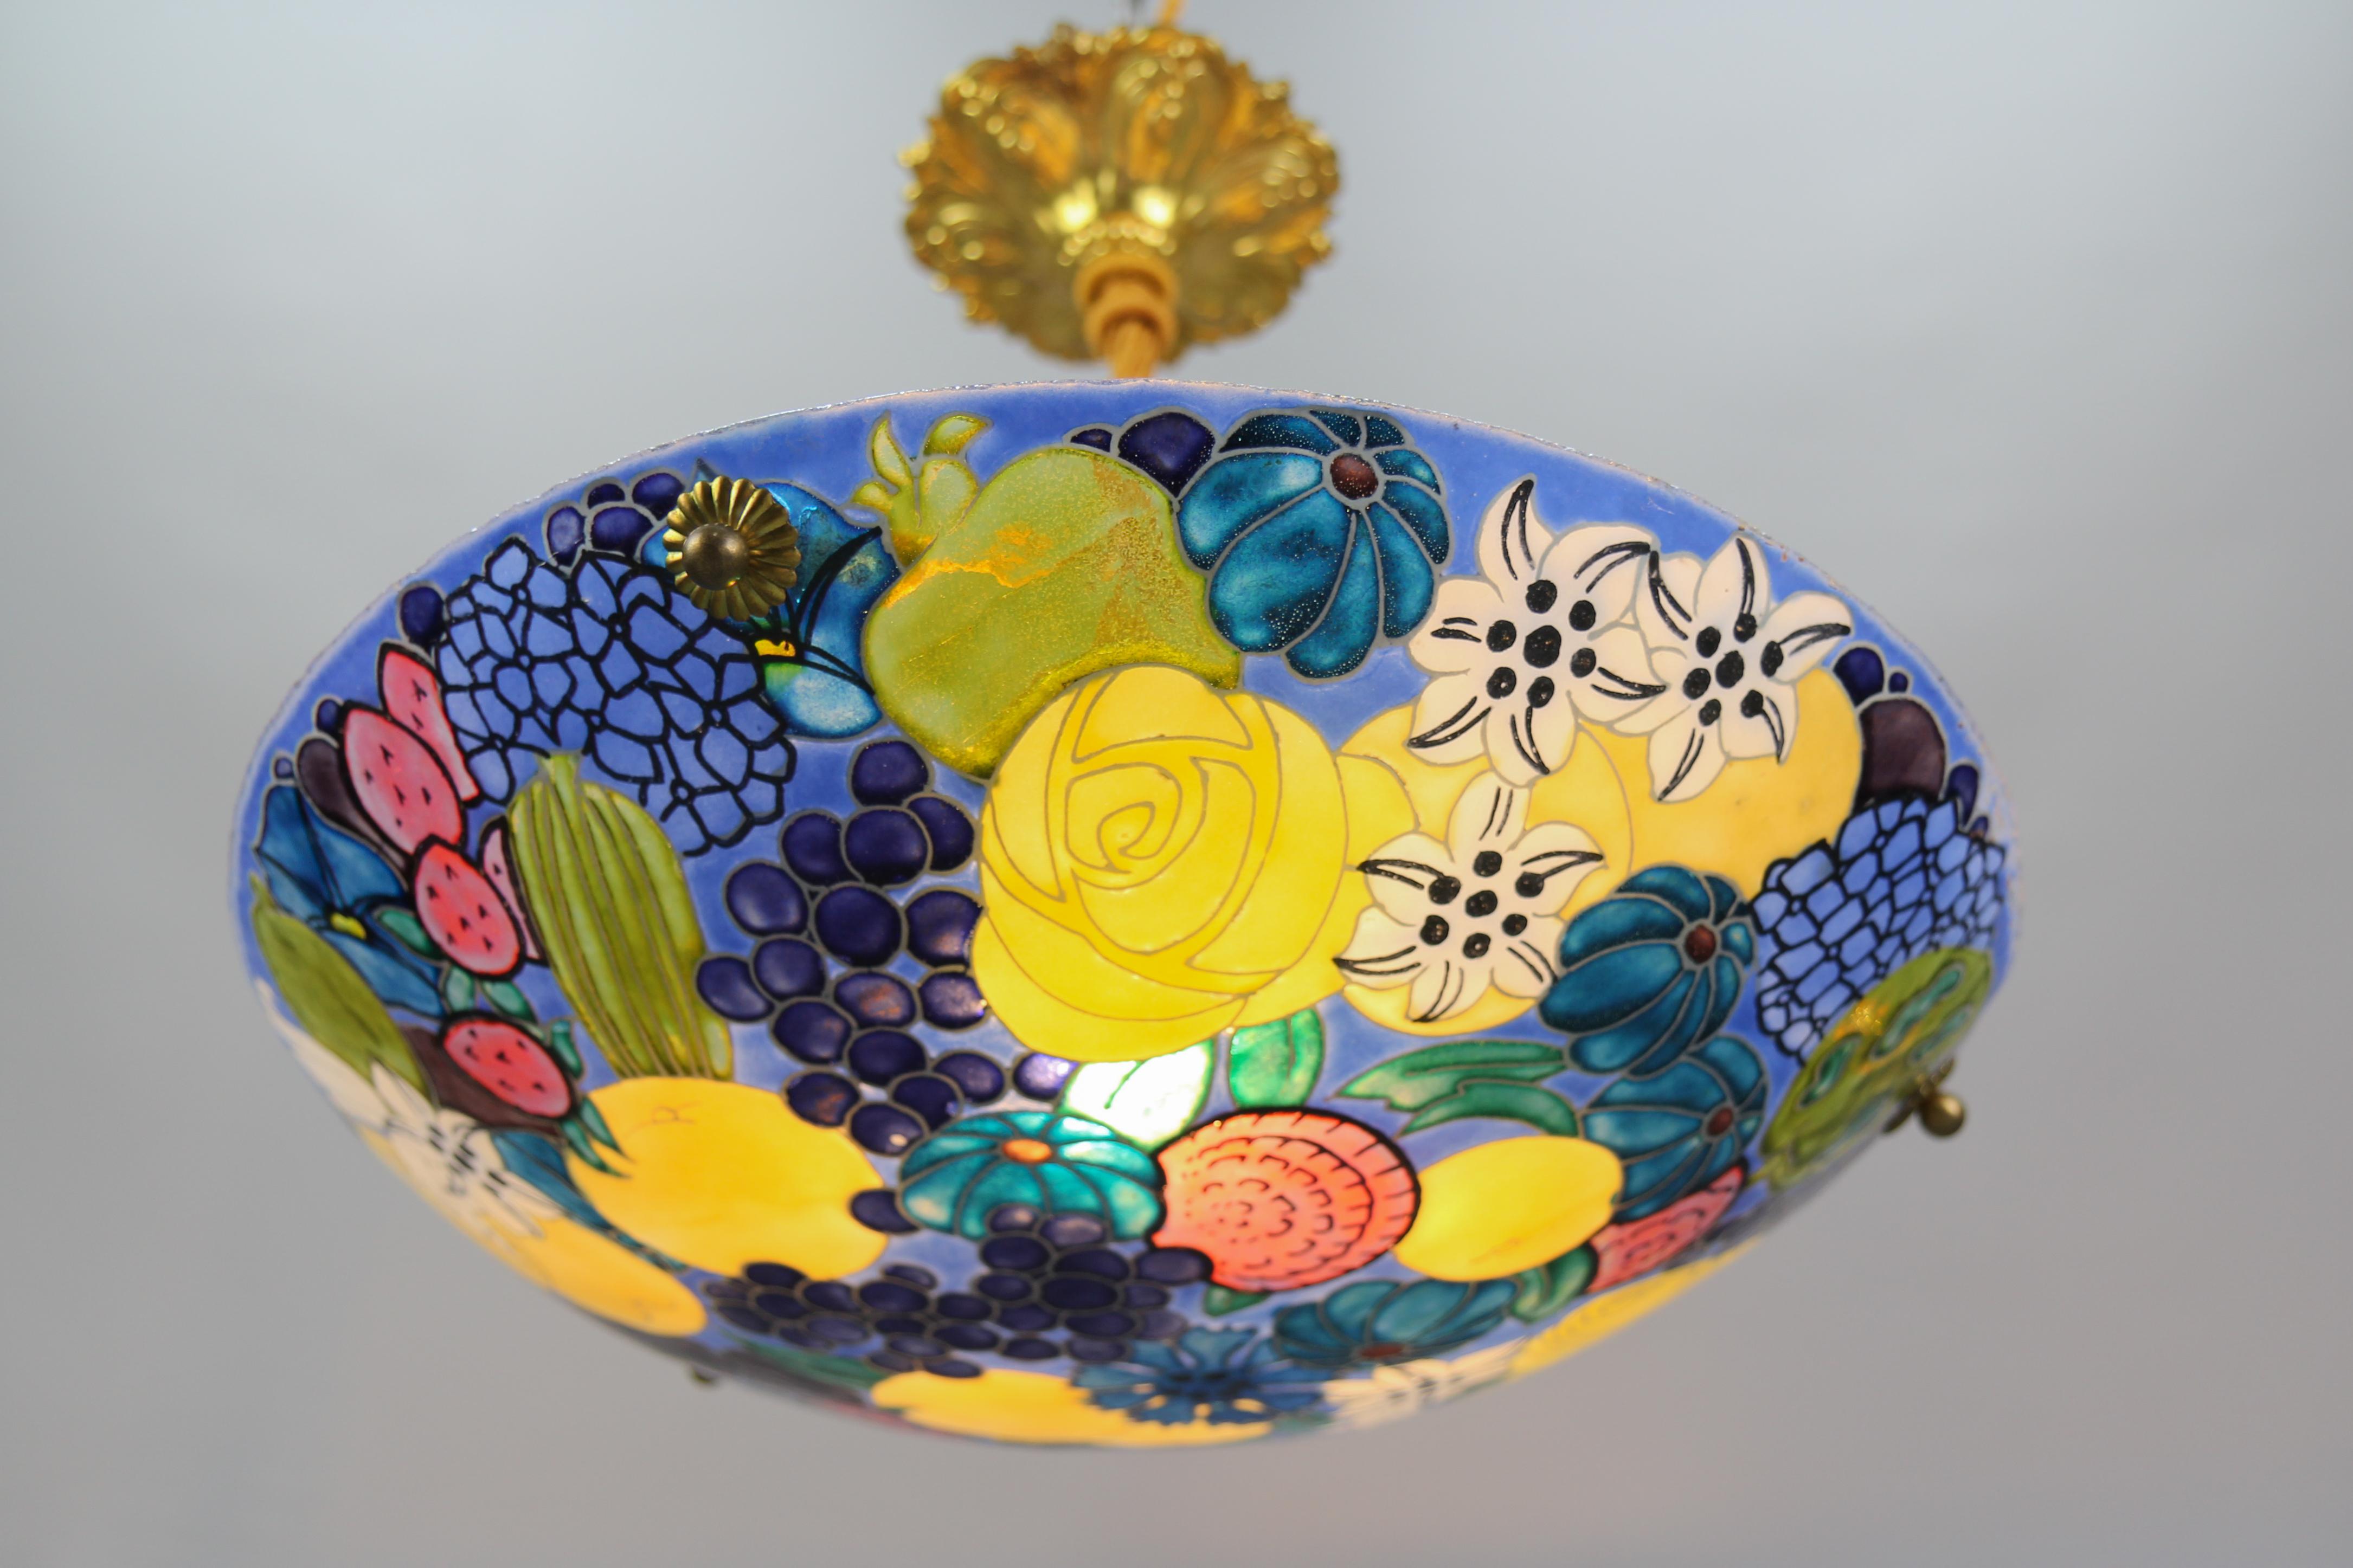 Mid-20th Century French Art Nouveau Pendant Light with Enameled Flowers and Fruits, Signed Fargue For Sale